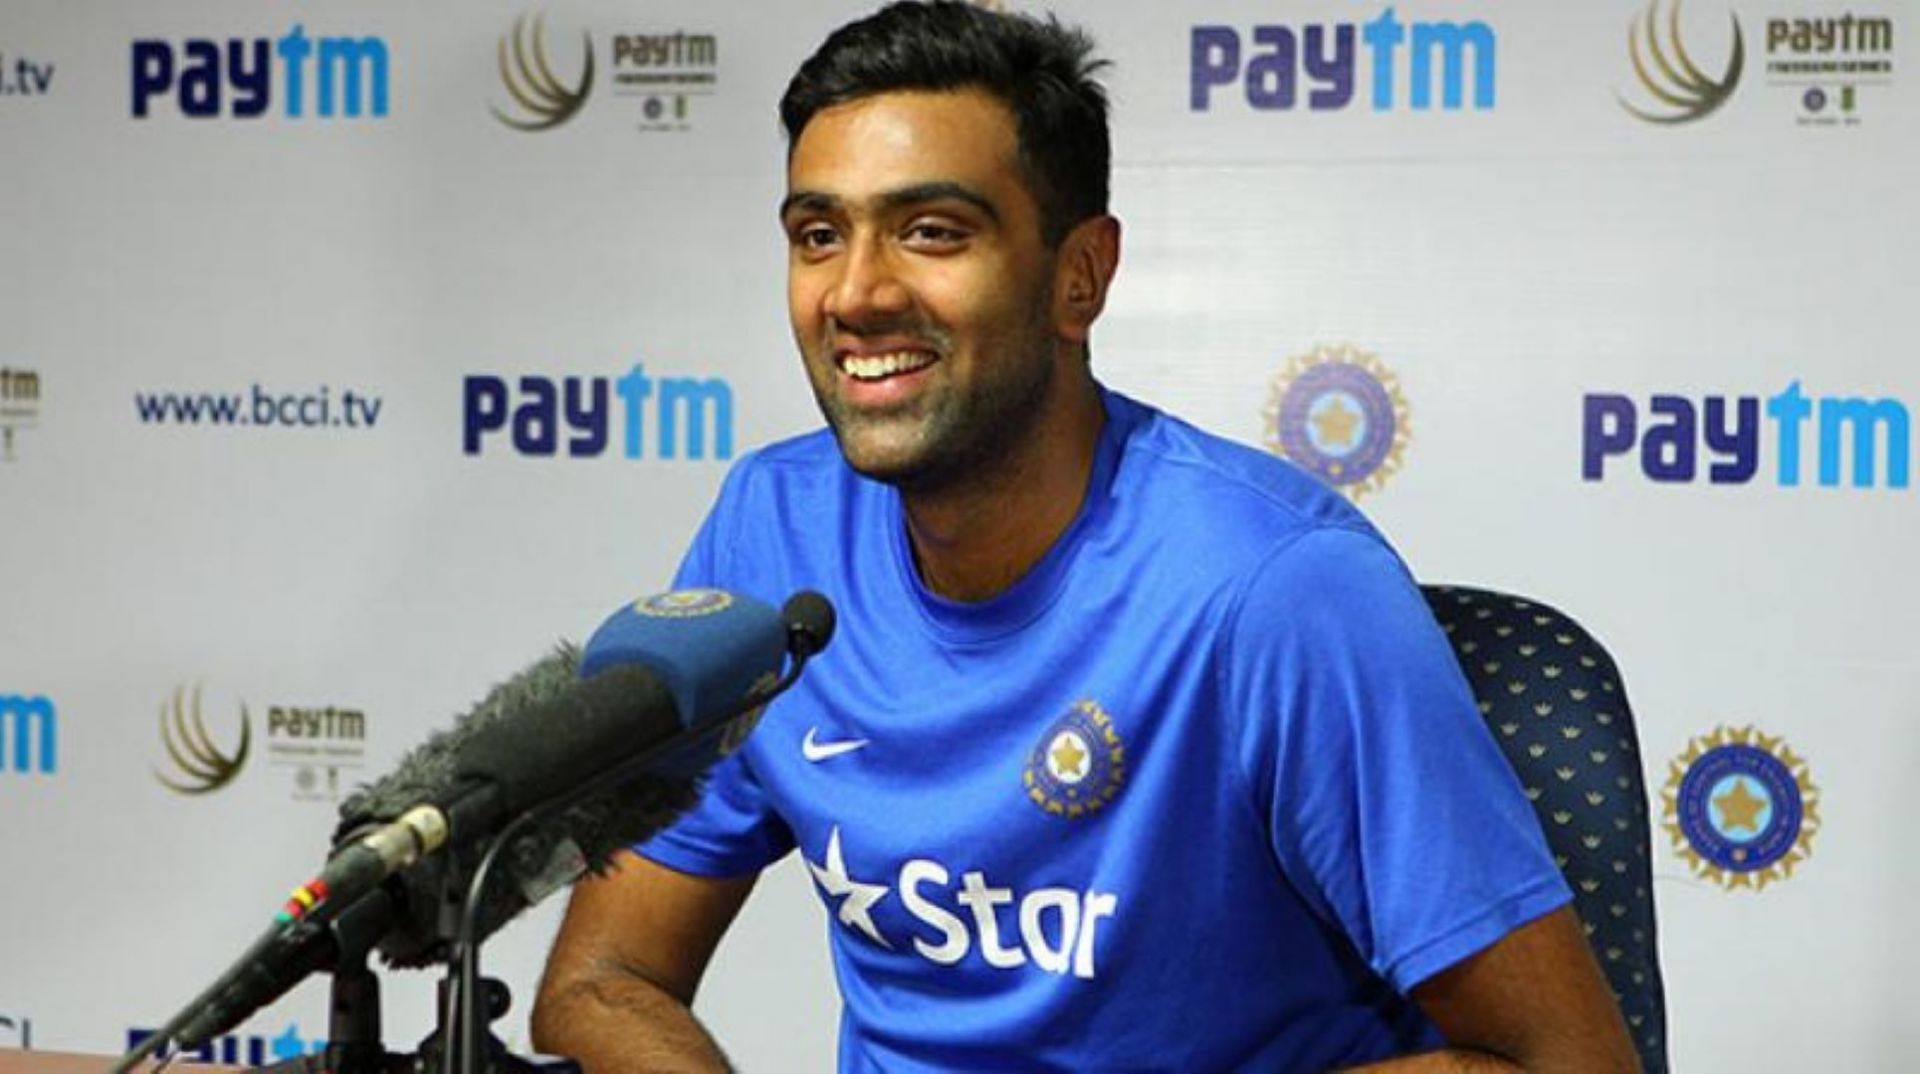 Ravichandran Ashwin reveals his all-time favorite movie and other film-related topics.